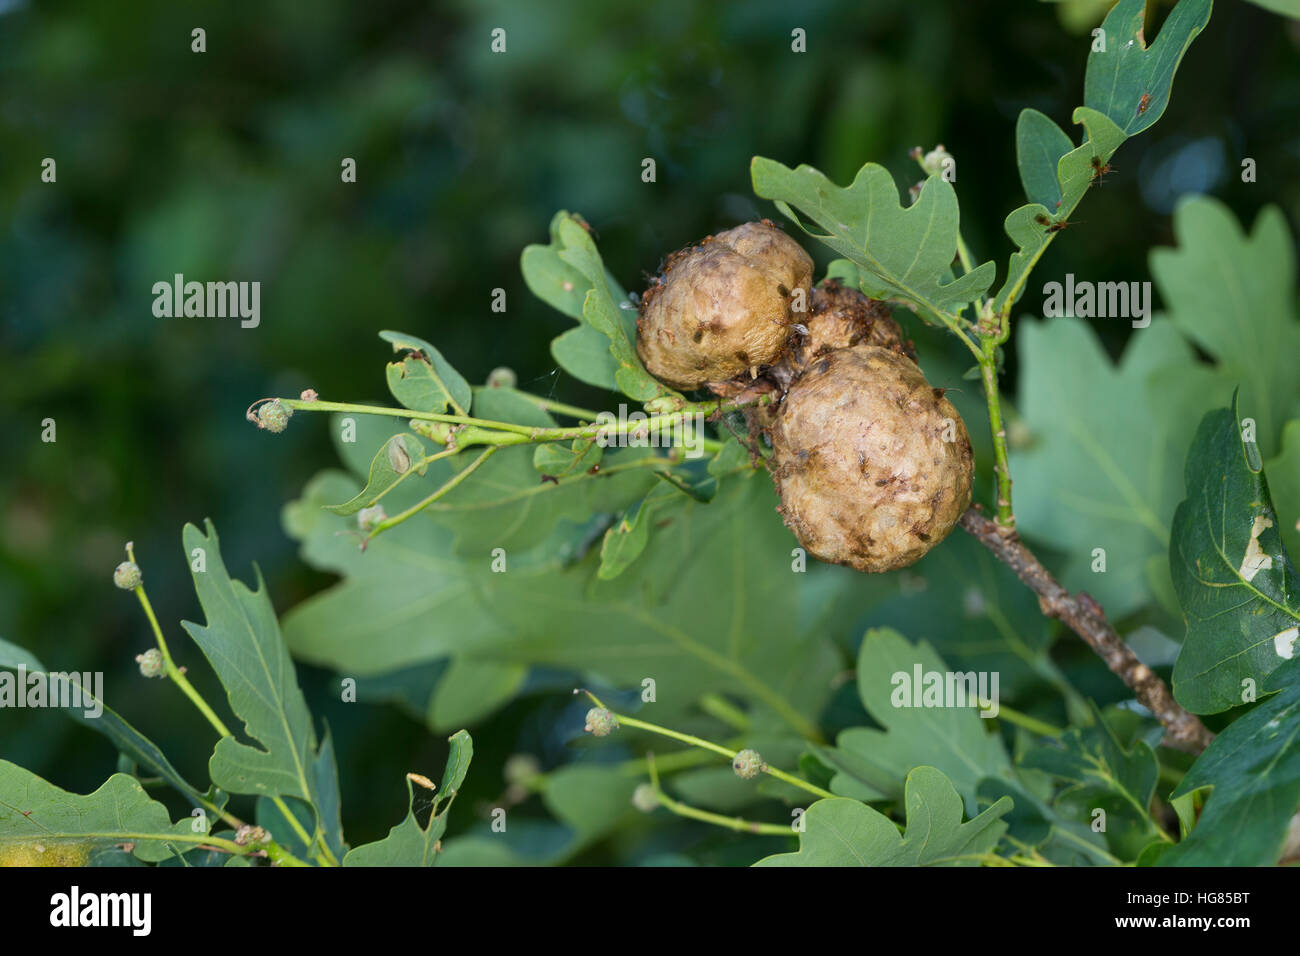 Gallwespen High Resolution Stock Photography and Images - Alamy